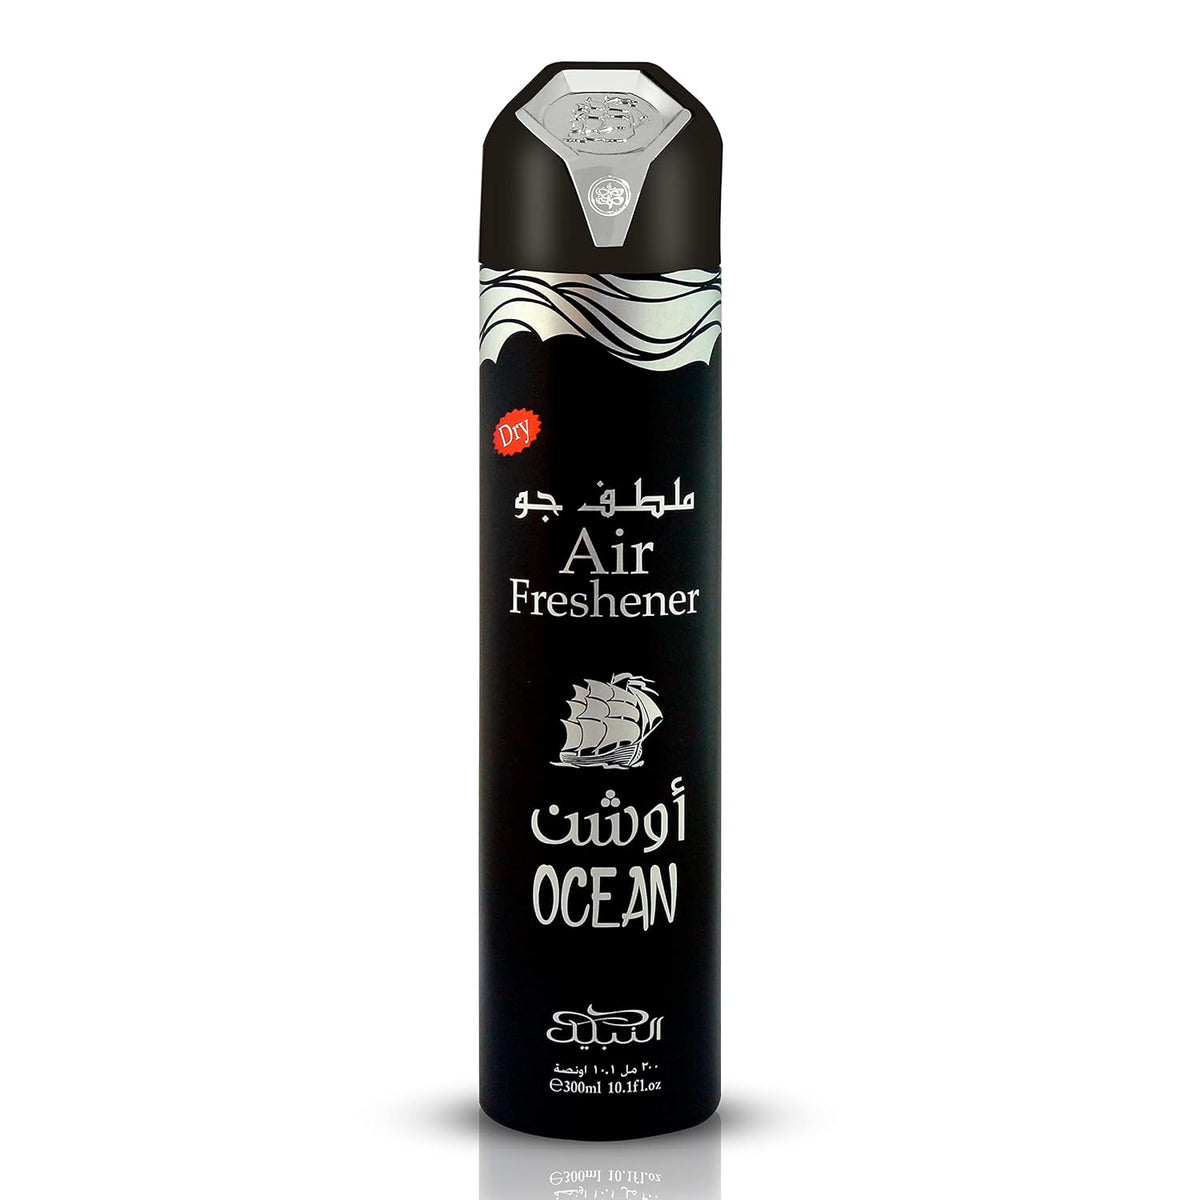 The image shows a canister of air freshener. The can is tall and cylindrical with a predominantly black background. It features the words "Air Freshener" in English at the top and "OCEAN" towards the bottom, suggesting that ocean is the scent of the product. There are also Arabic scripts present above the word "OCEAN." The top of the can has a plastic lid, which seems to have a silver-colored diamond pattern design. The brand logo and additional decorative elements are in gold, red, and white colors.